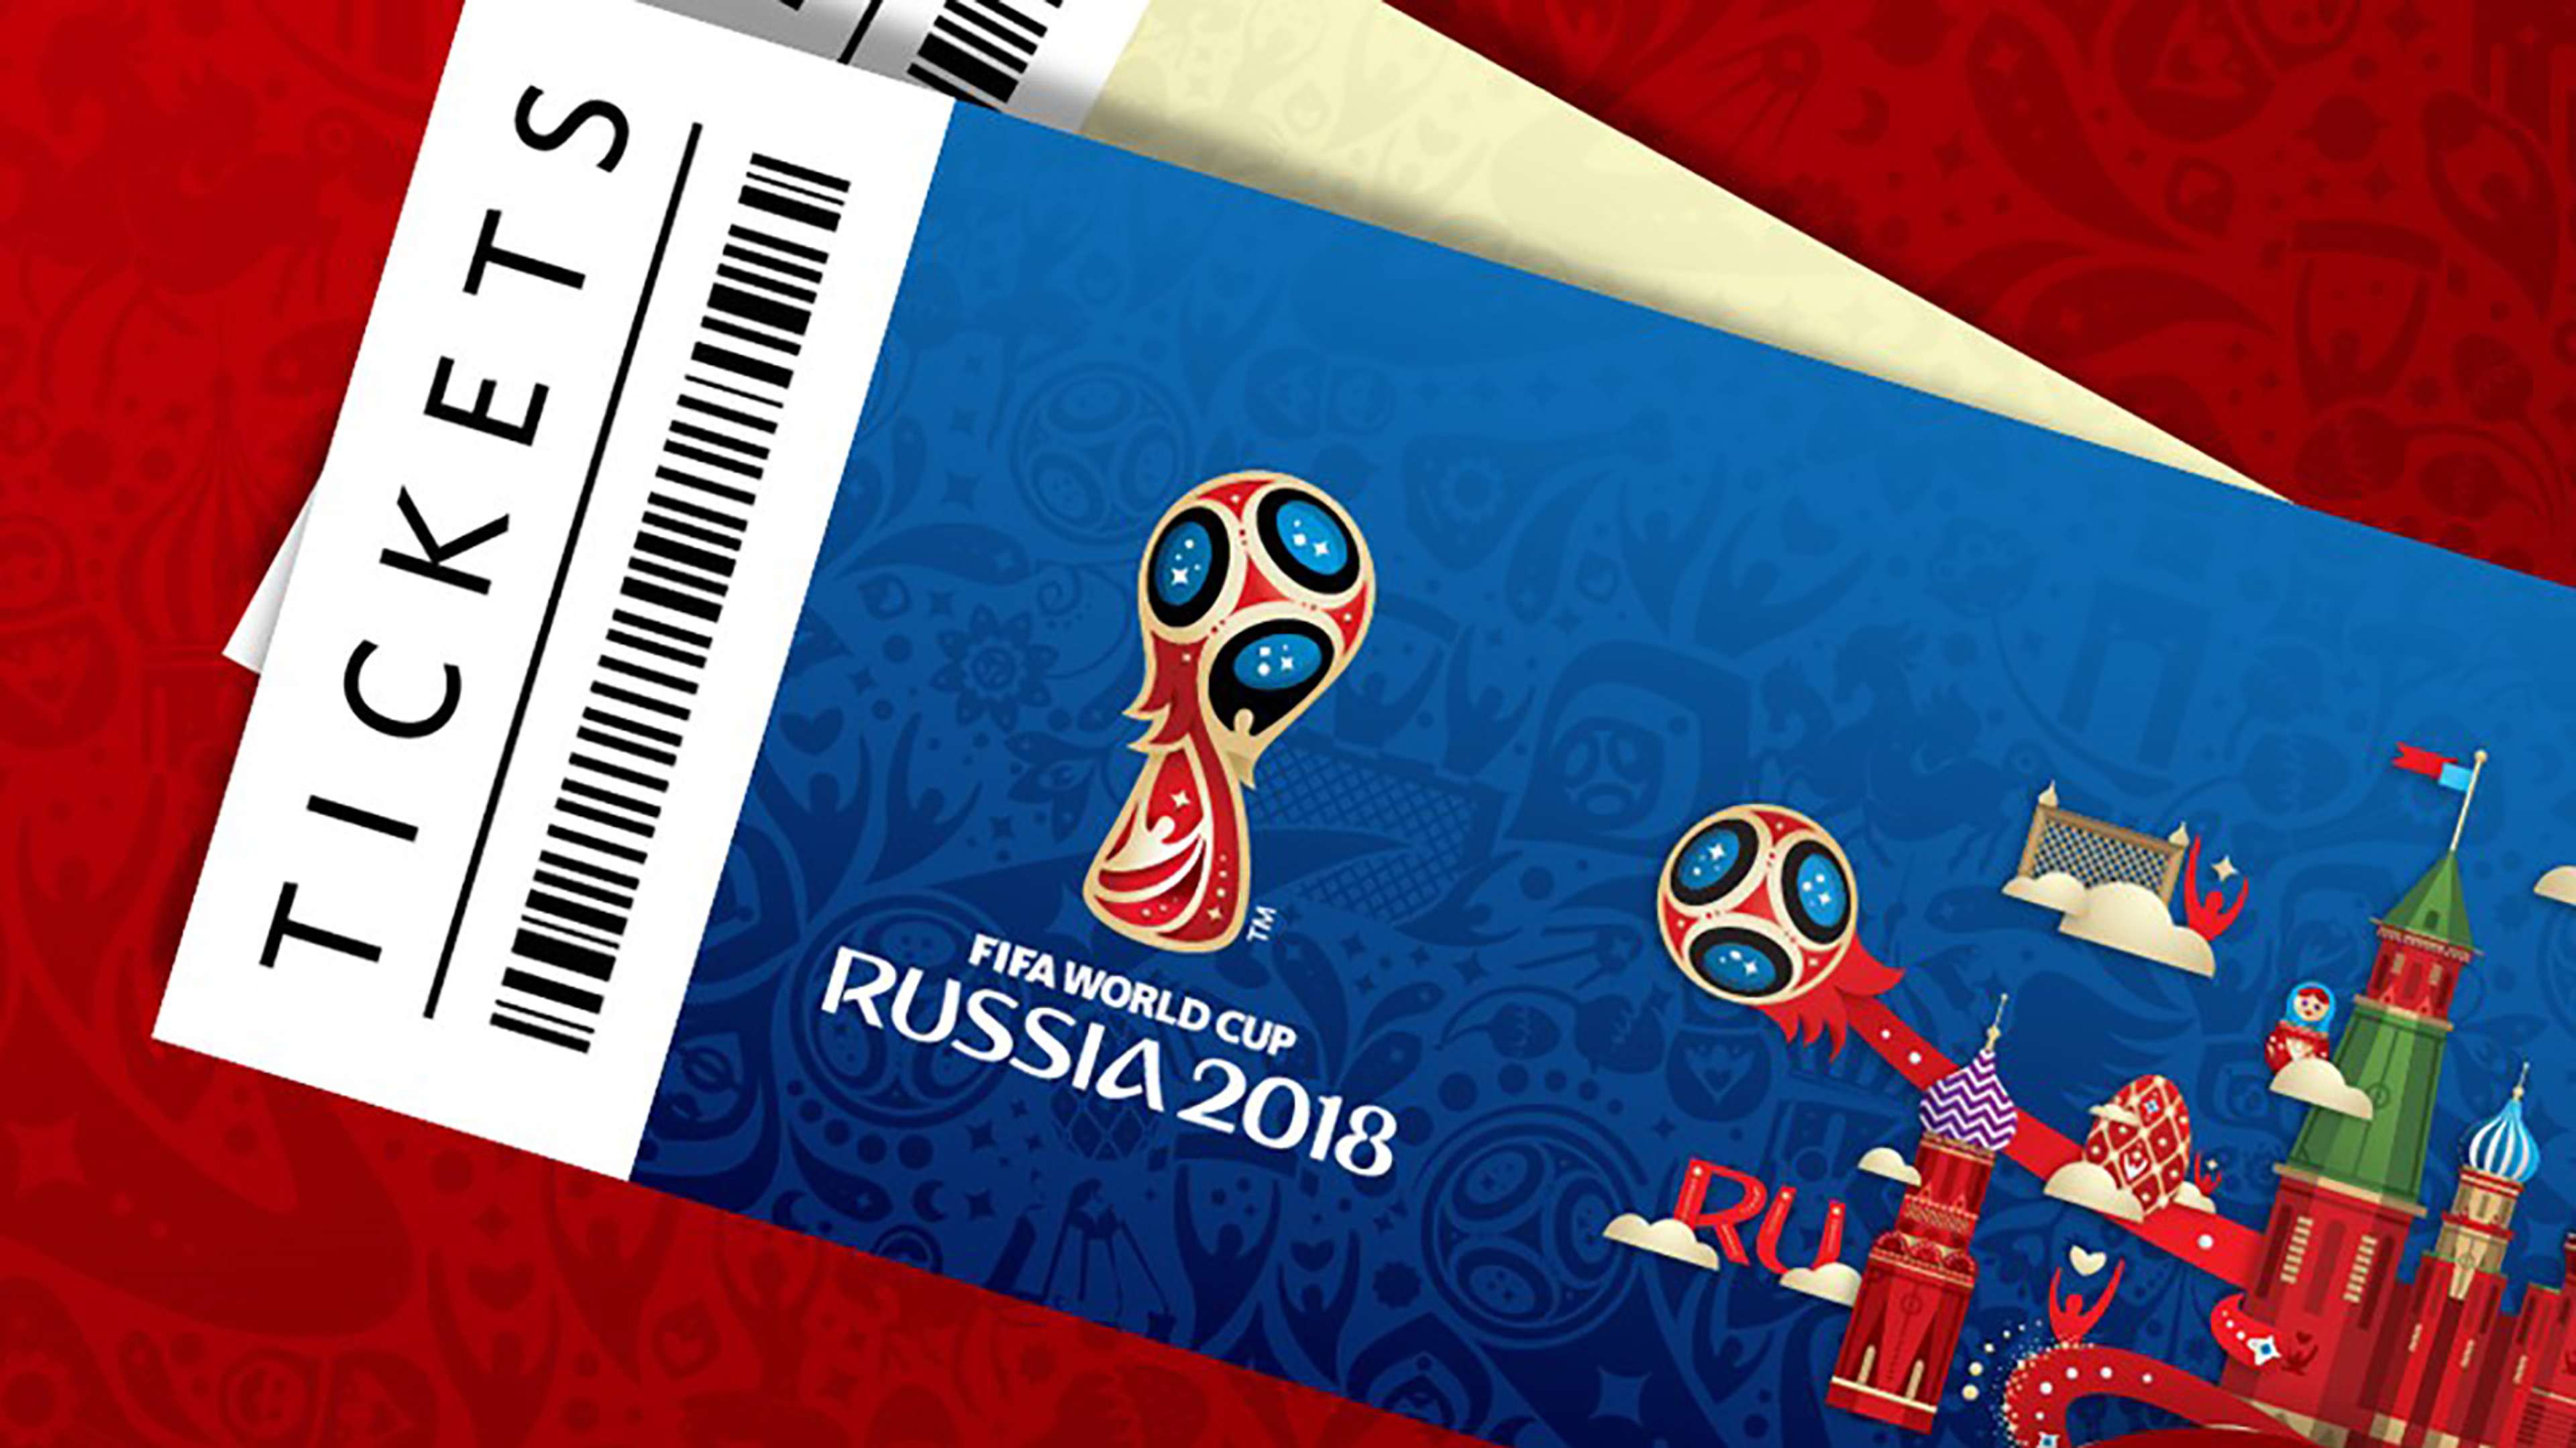 FIFA World Cup 2018 tickets